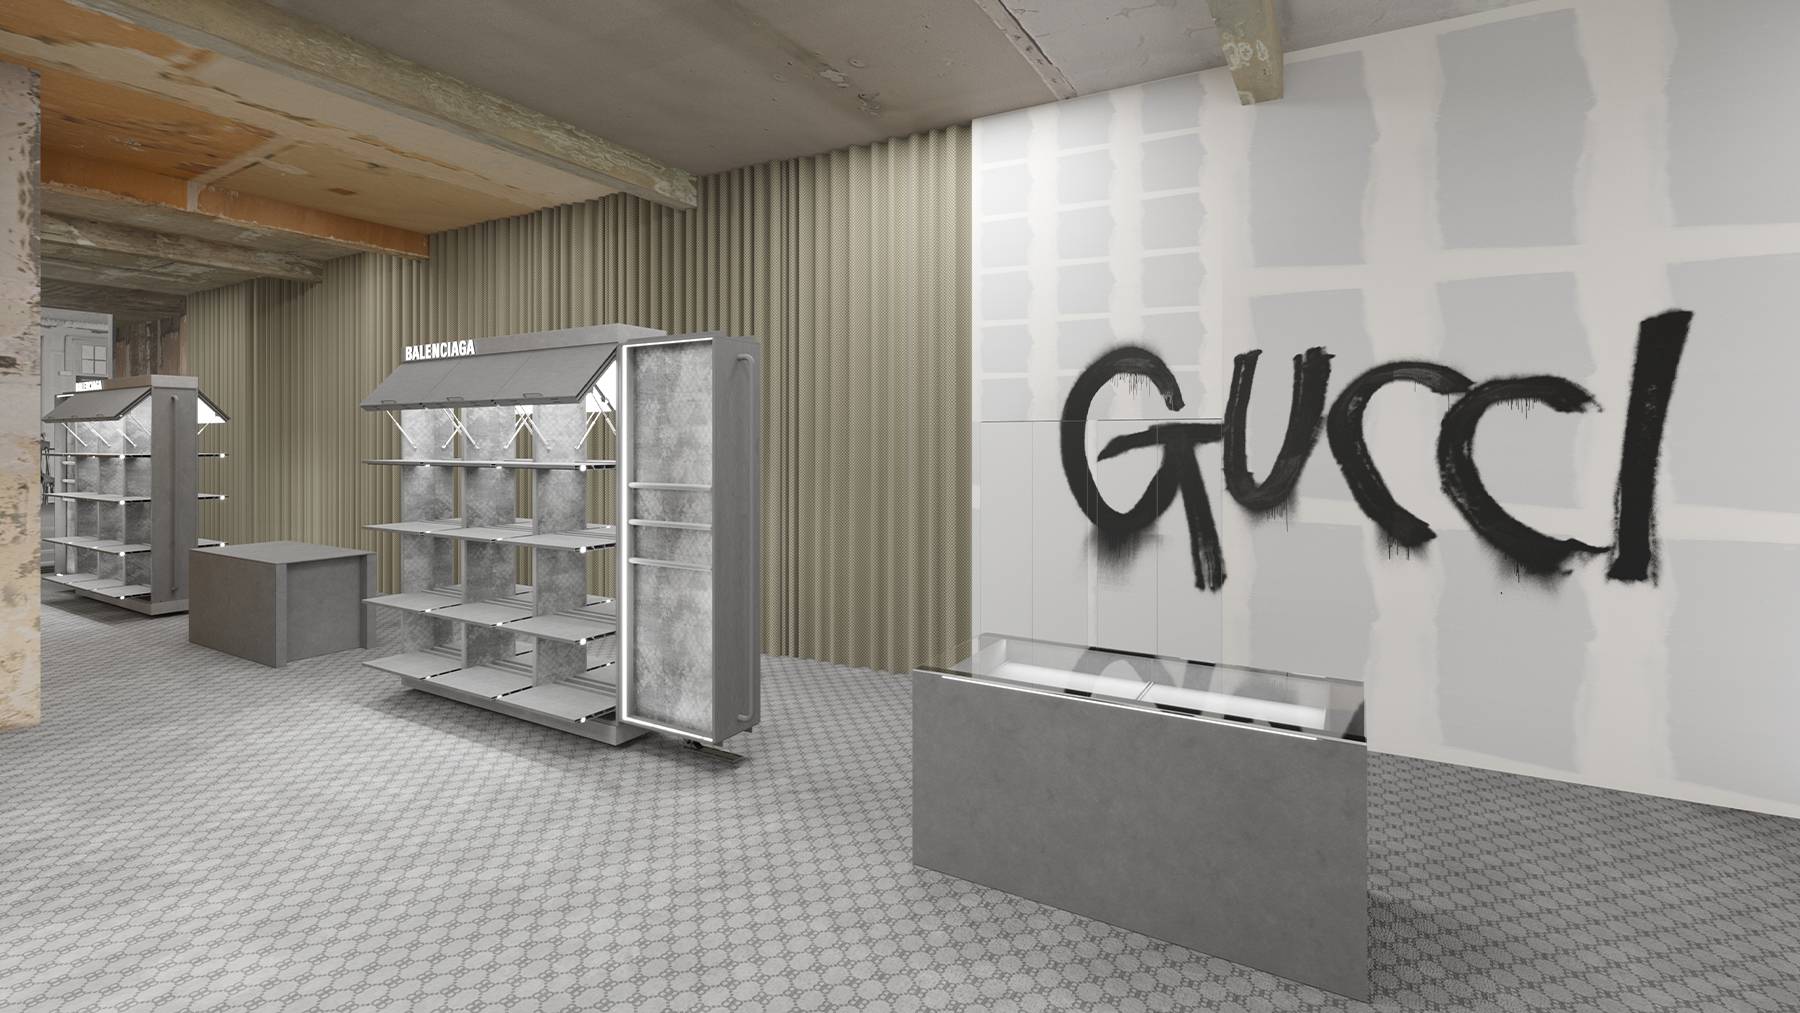 The raw space that is set to house Balenciaga’s three-week pop-up shop at 35-37 Rue des Francs Bourgeois, showcasing its Gucci “Hacker” project.